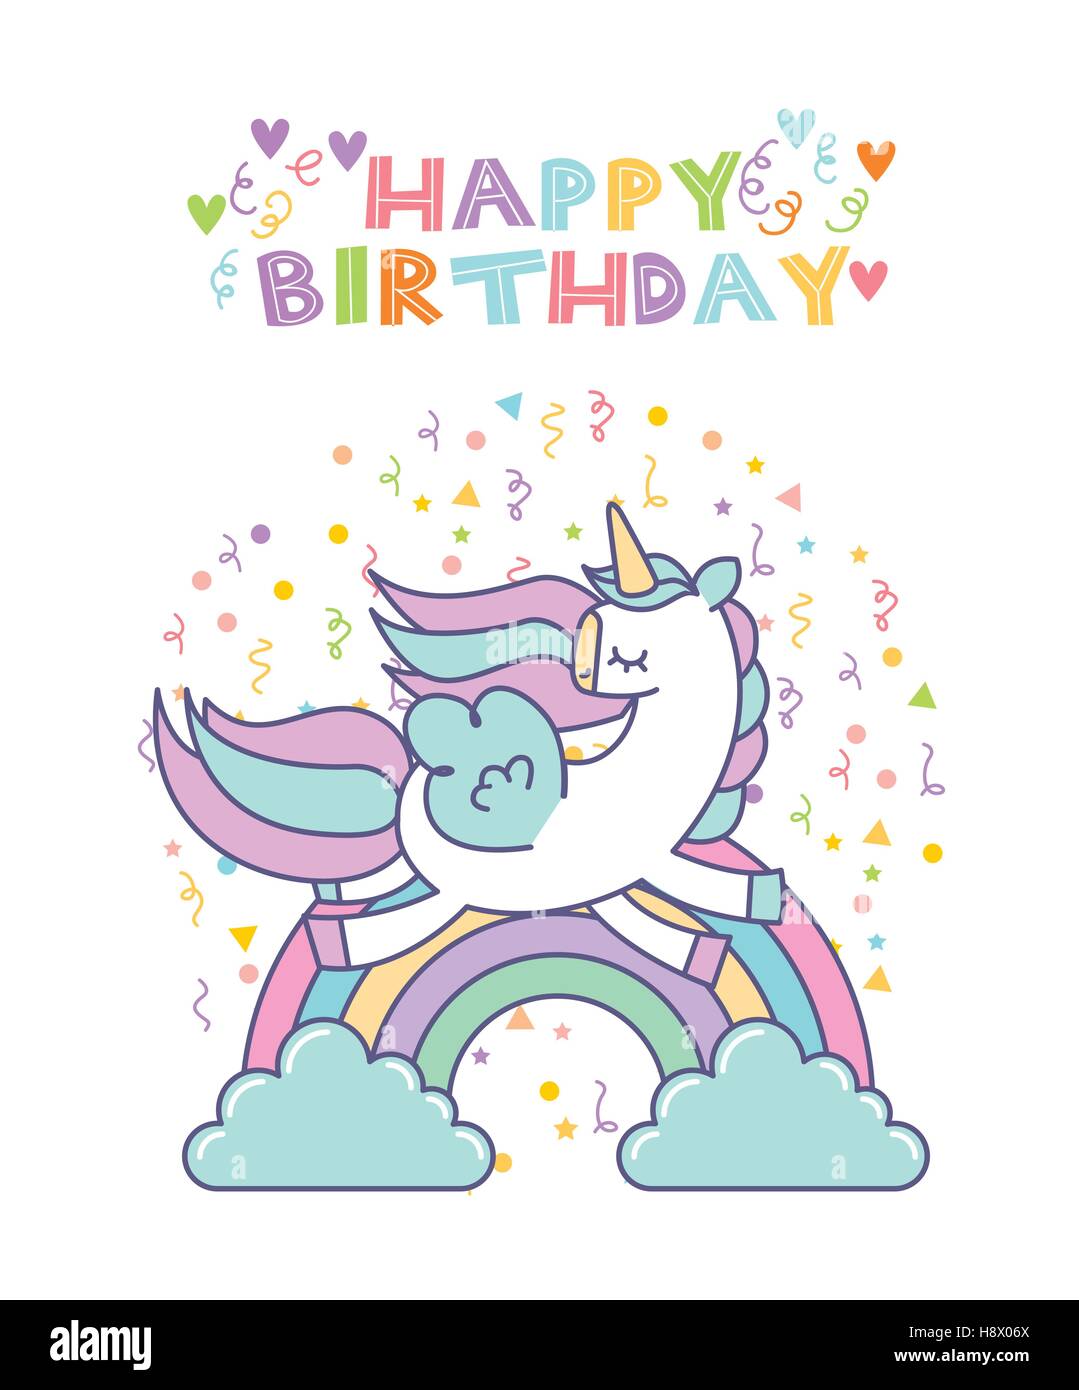 happy birthday card with cute unicorn icon over white background ...